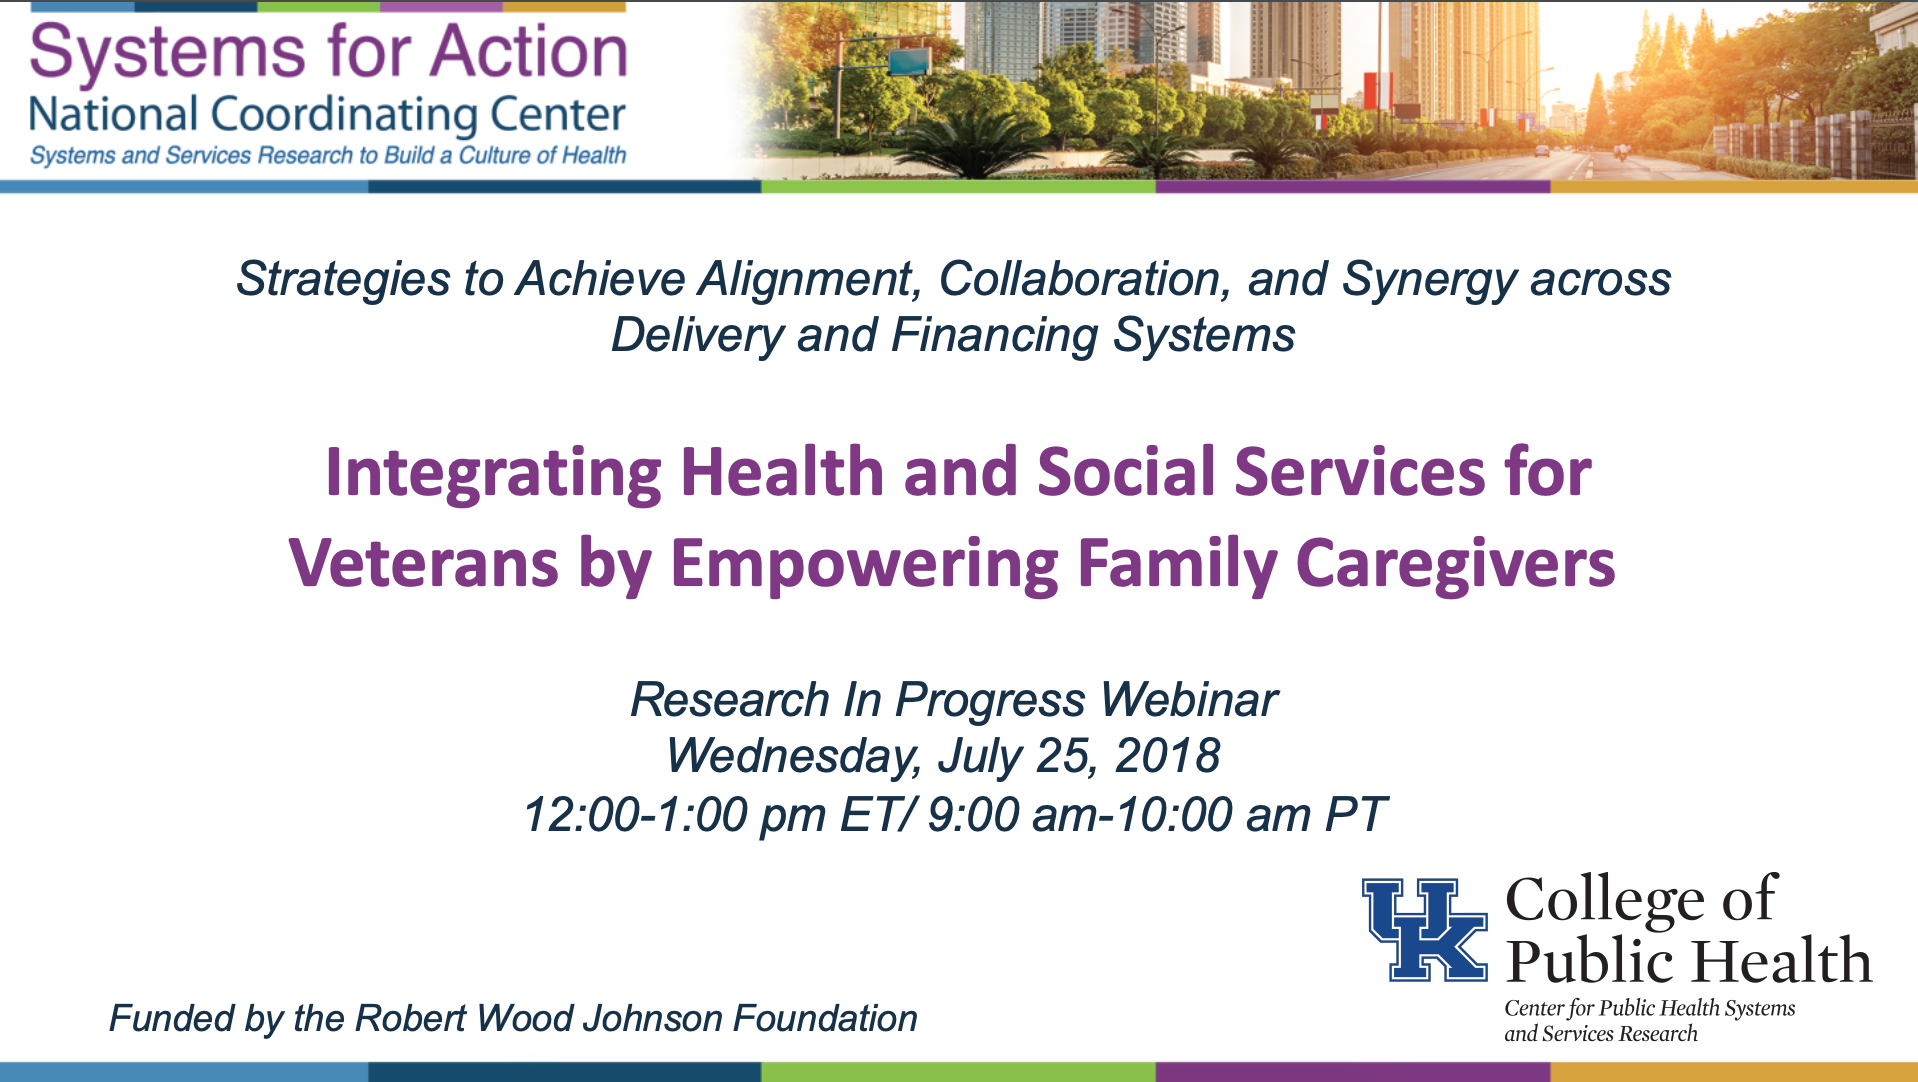 Strategies to Achieve Alignment, Collaboration, and Synergy across Delivery and Financing Systems: Integrating Health and Social Services for Veterans by Empowering Family Caregivers